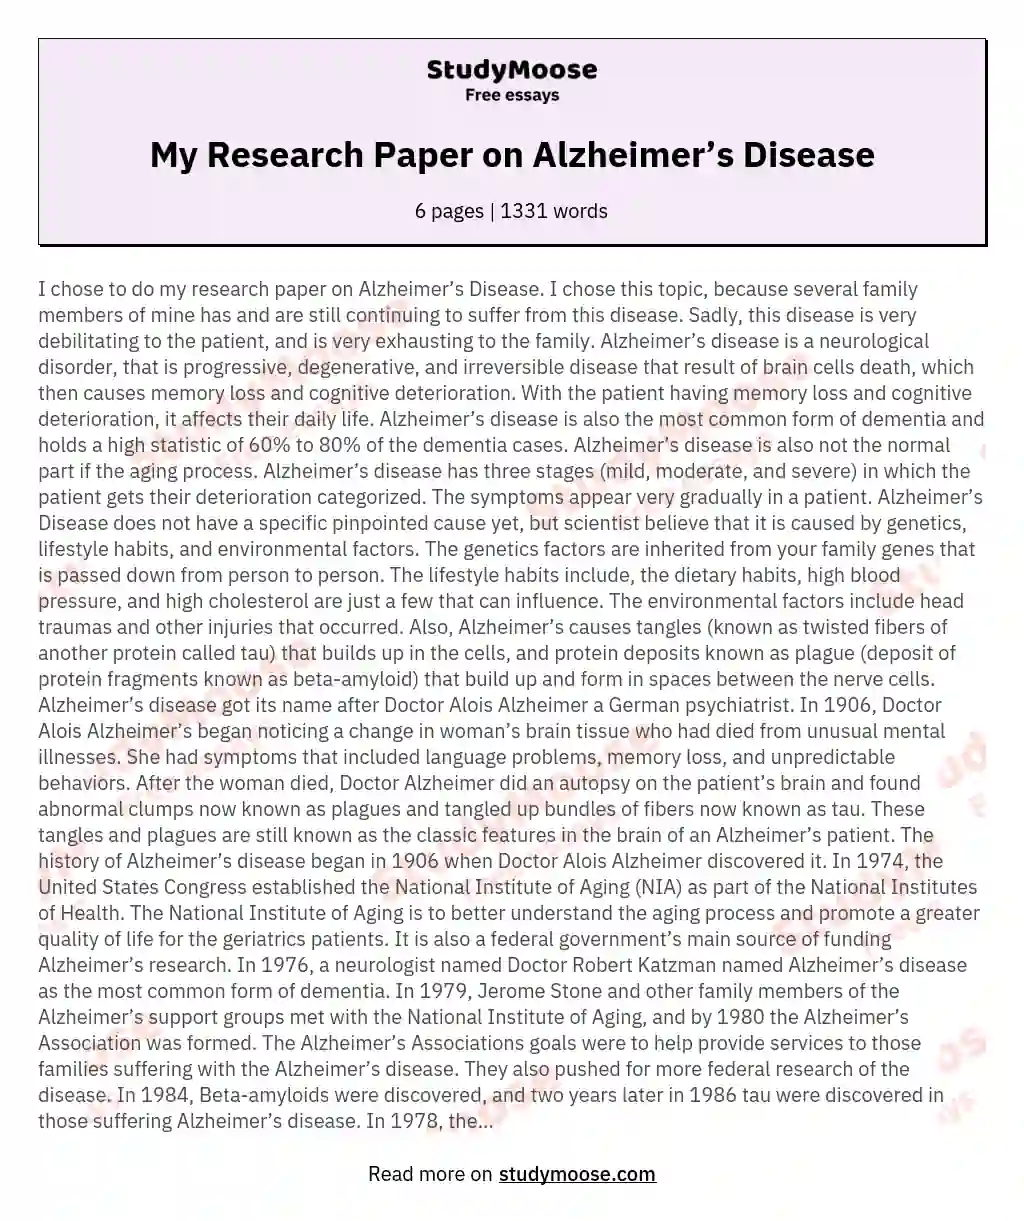 My Research Paper on Alzheimer’s Disease essay